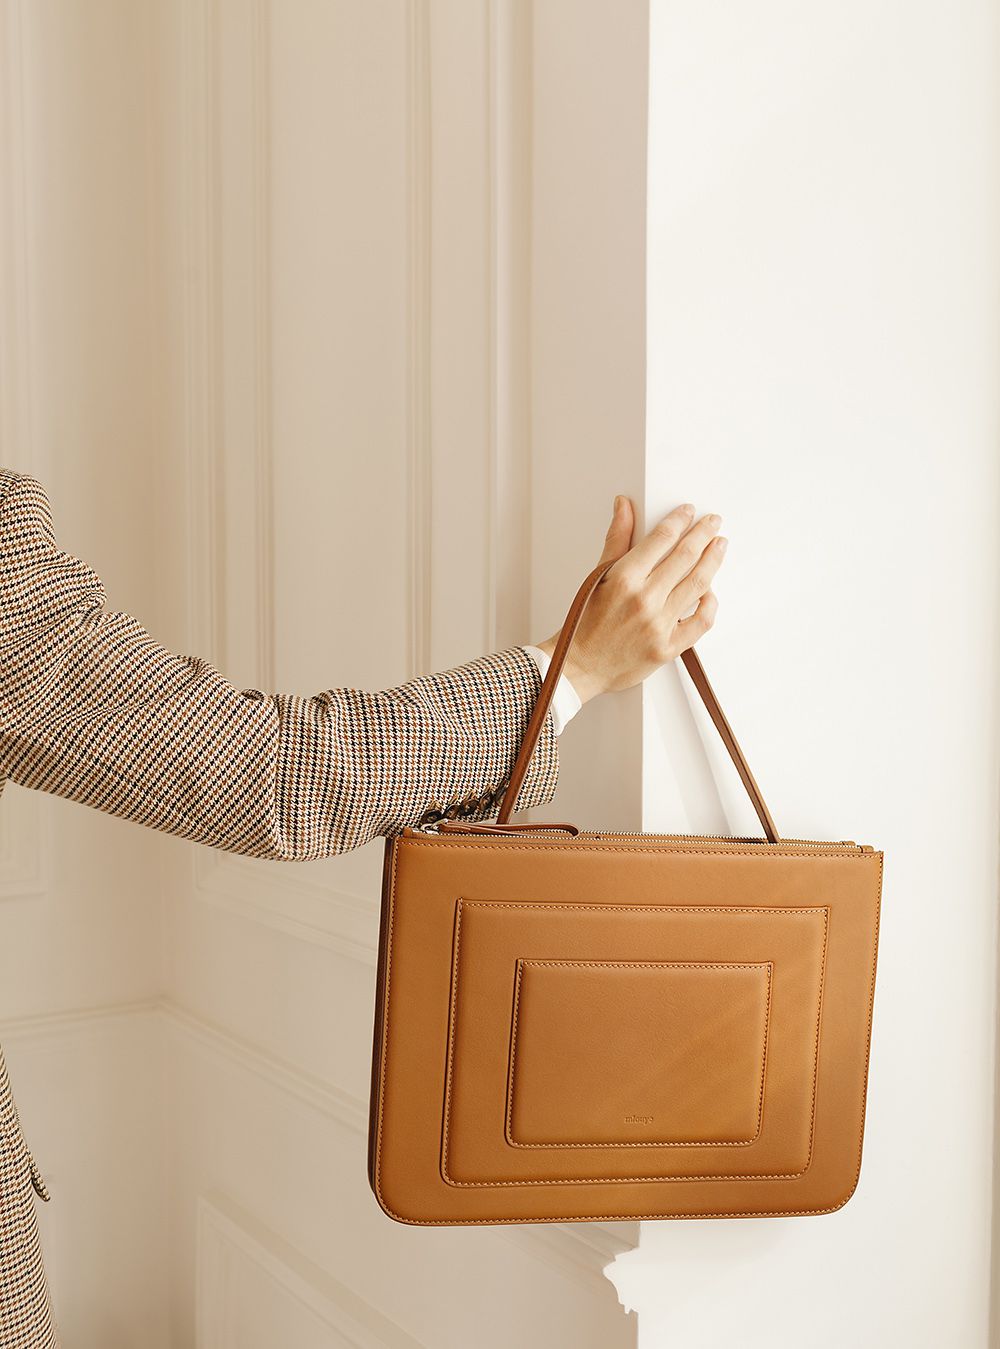 A campaign image for Mlouye purses